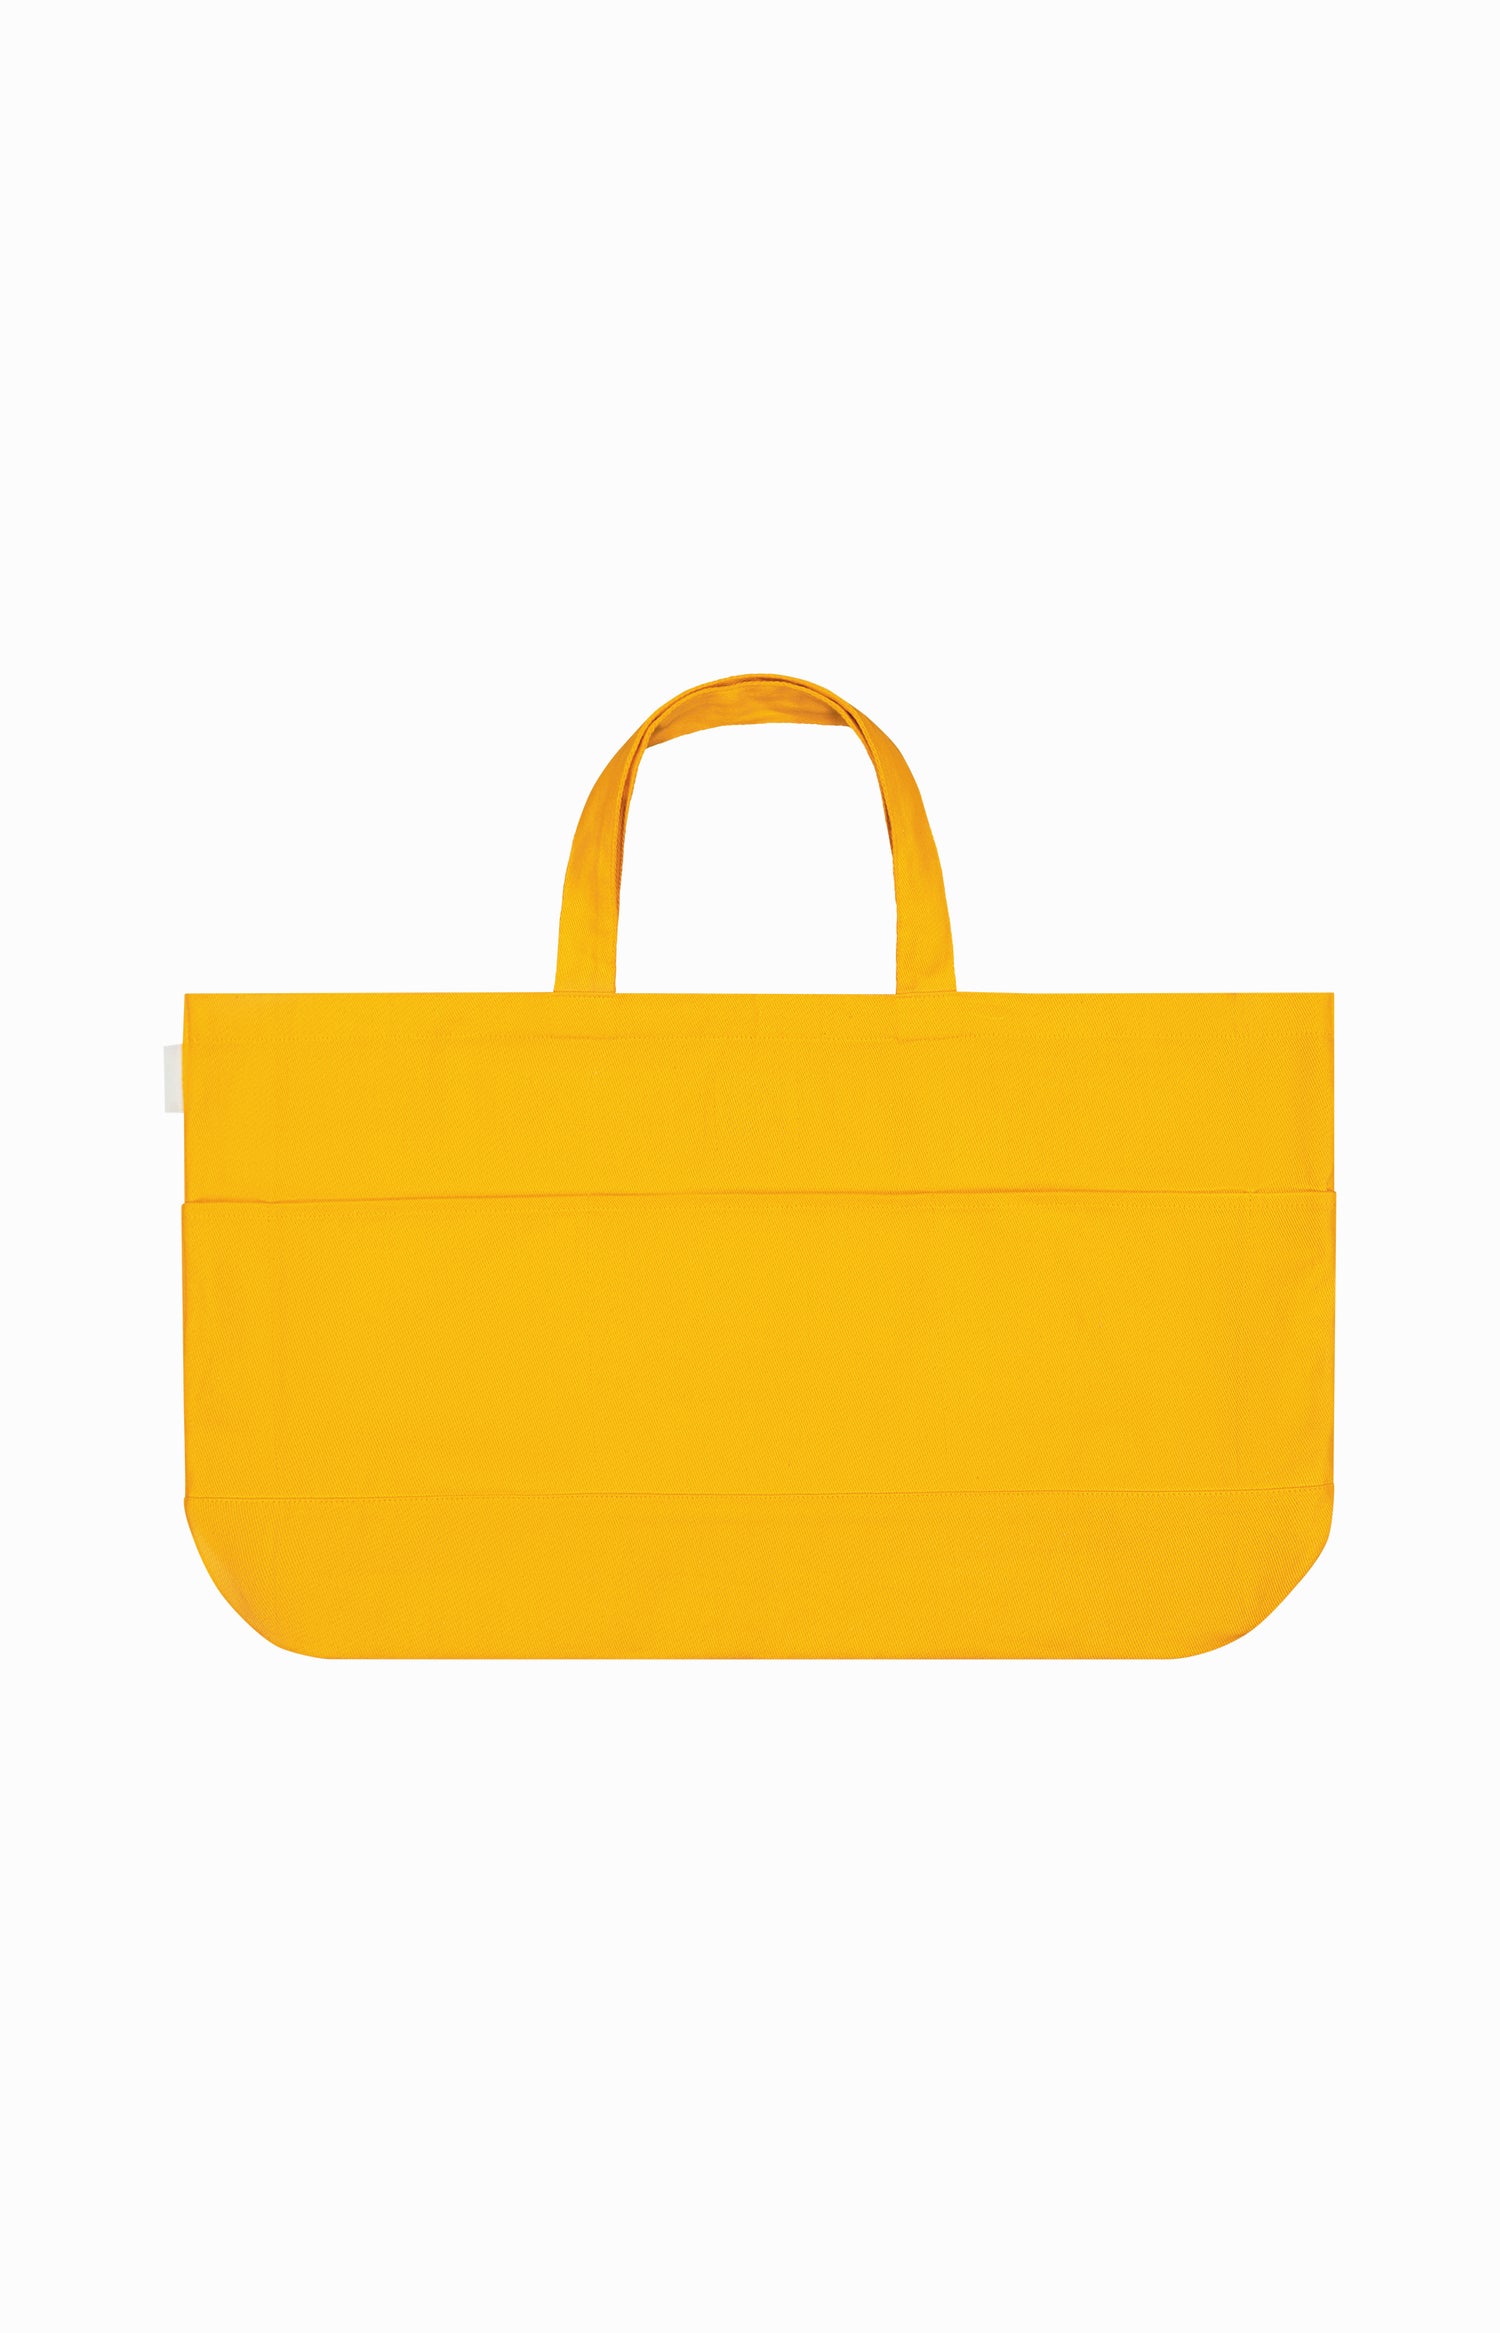 clear cut of yellow beach bag with handle